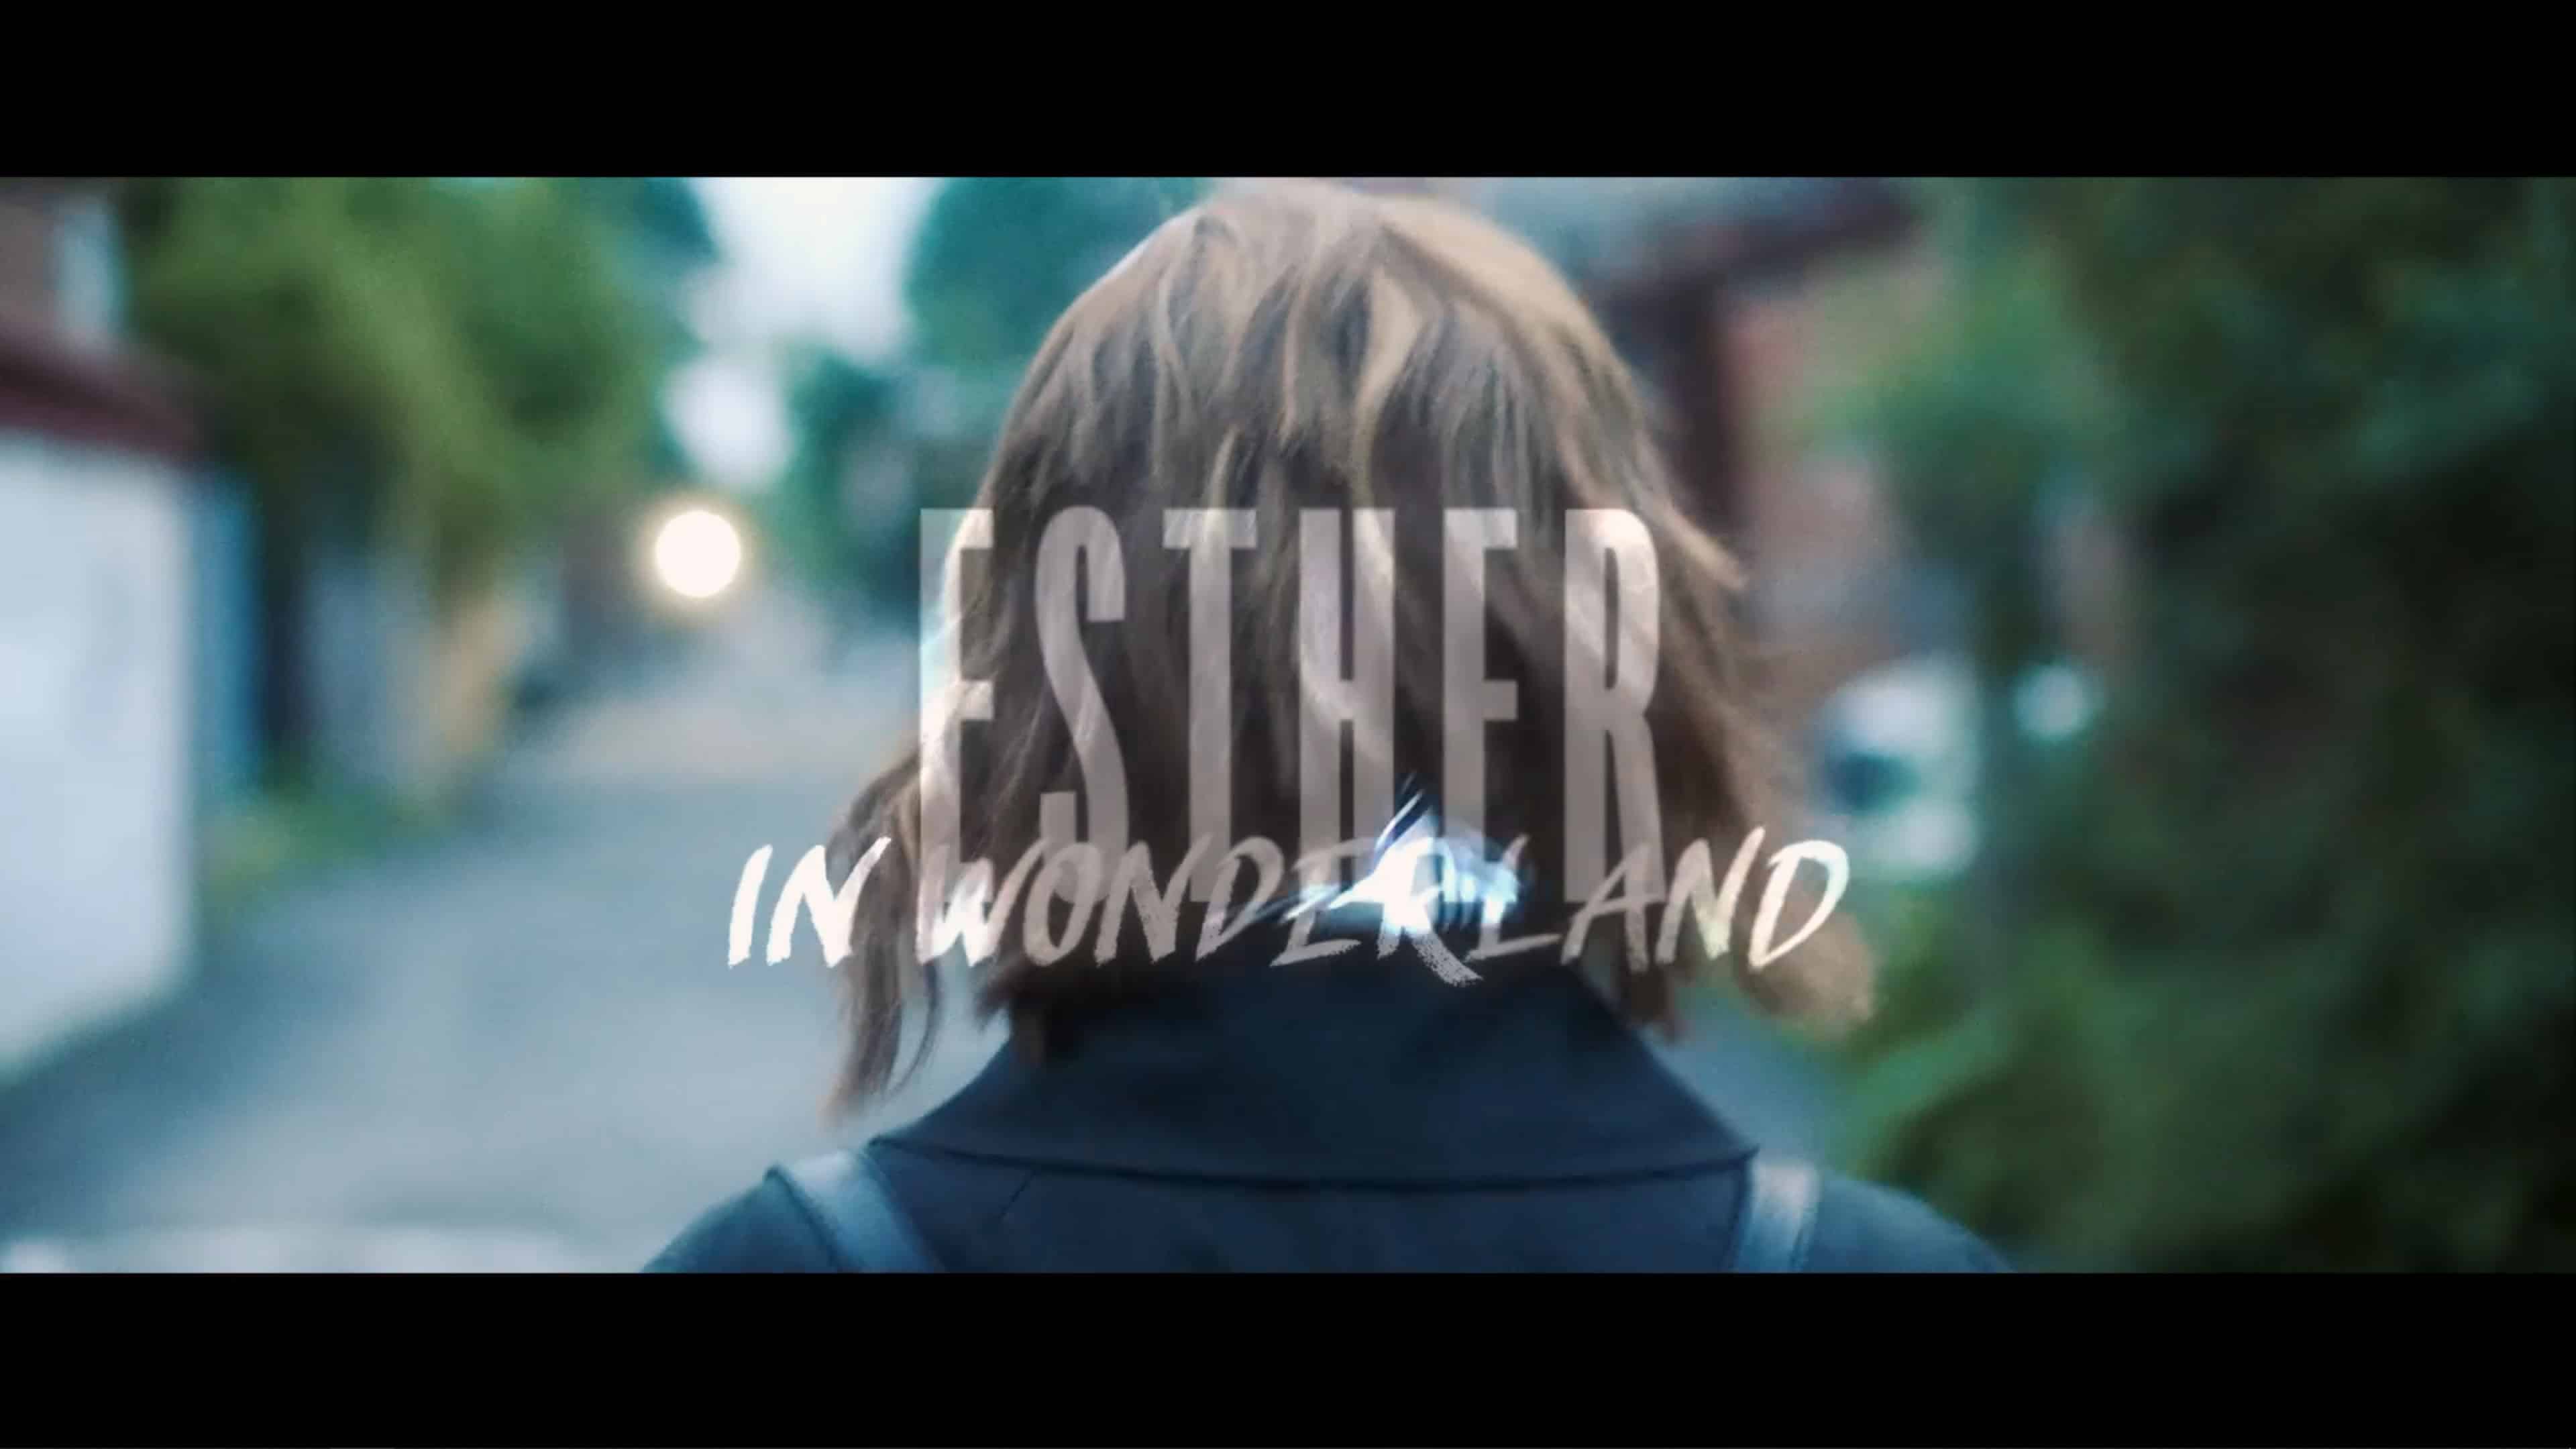 Esther In Wonderland (2021) – Review/Summary (with Spoilers)